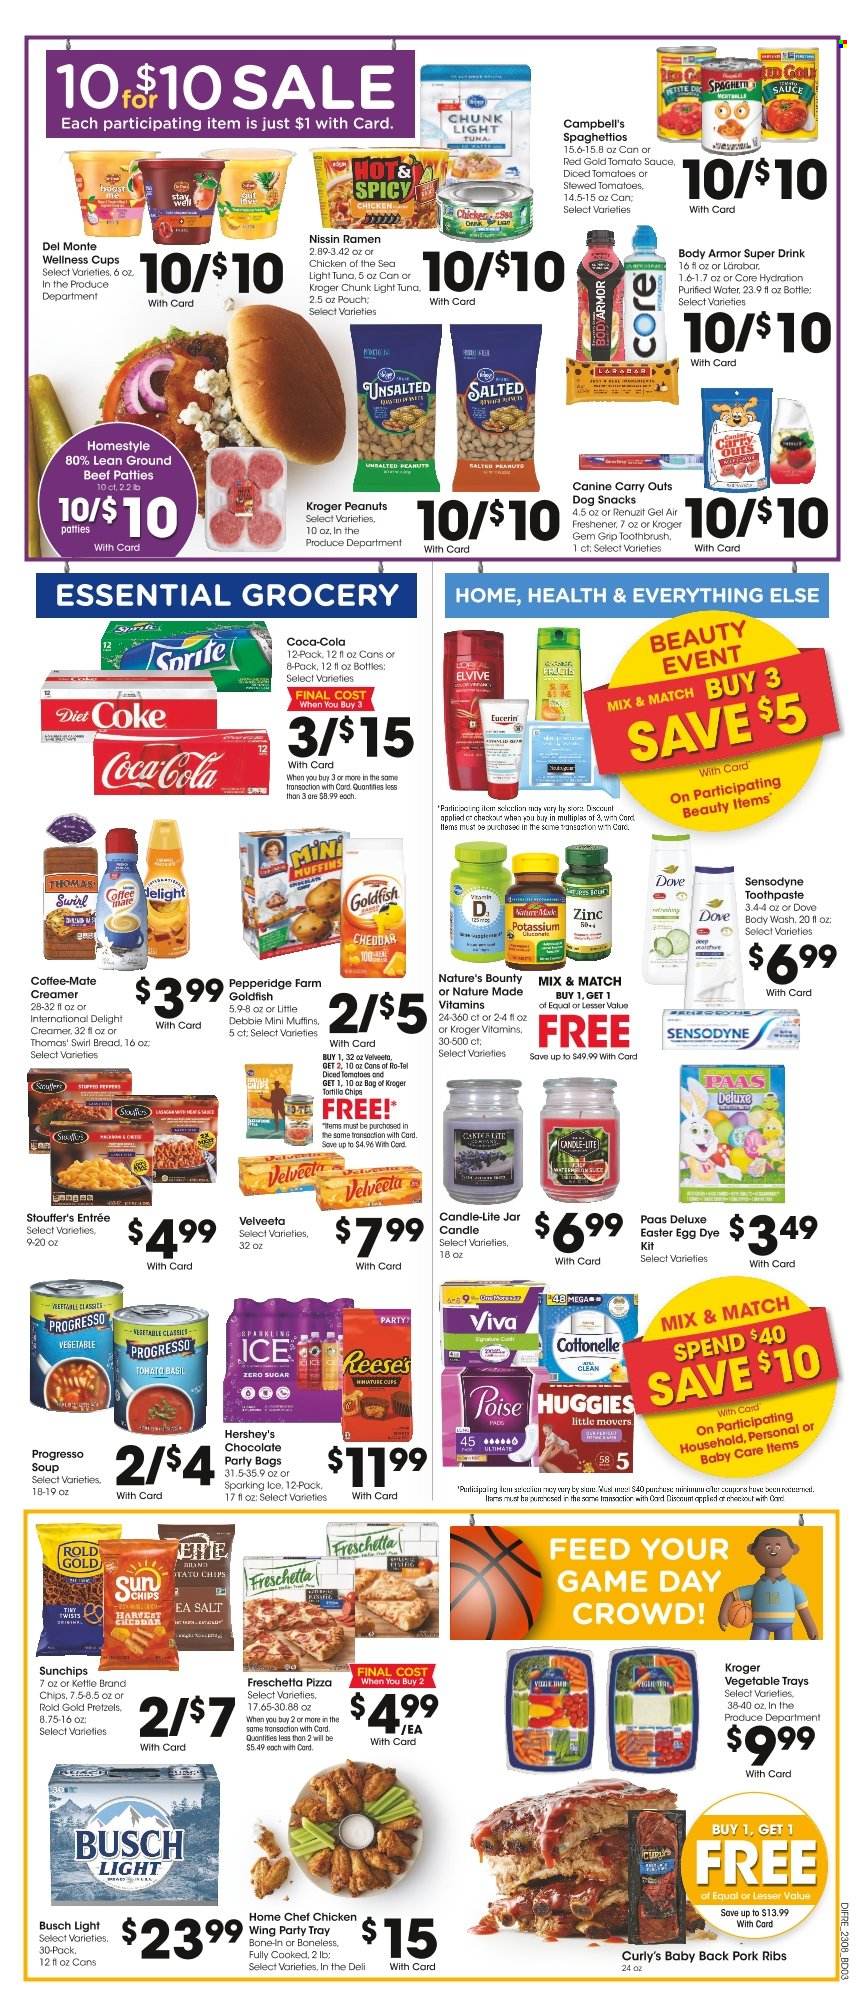 thumbnail - Baker's Flyer - 03/22/2023 - 03/28/2023 - Sales products - pretzels, muffin, peppers, Campbell's, ramen, spaghetti, pizza, meatballs, Progresso, Nissin, cheese, Coffee-Mate, creamer, Reese's, Hershey's, Stouffer's, Dove, chocolate, snack, easter egg, tortilla chips, chips, Goldfish, tomato sauce, light tuna, Chicken of the Sea, diced tomatoes, Del Monte, peanuts, Coca-Cola, Sprite, Body Armor, Diet Coke, Coke, purified water, water, beer, Busch, beef meat, ground beef, ribs, pork meat, pork ribs, pork back ribs, Huggies, Cottonelle, body wash, toothbrush, toothpaste, Sensodyne, L’Oréal, Eucerin, cup, candle, Renuzit, air freshener, Nature Made, Nature's Bounty, zinc. Page 2.